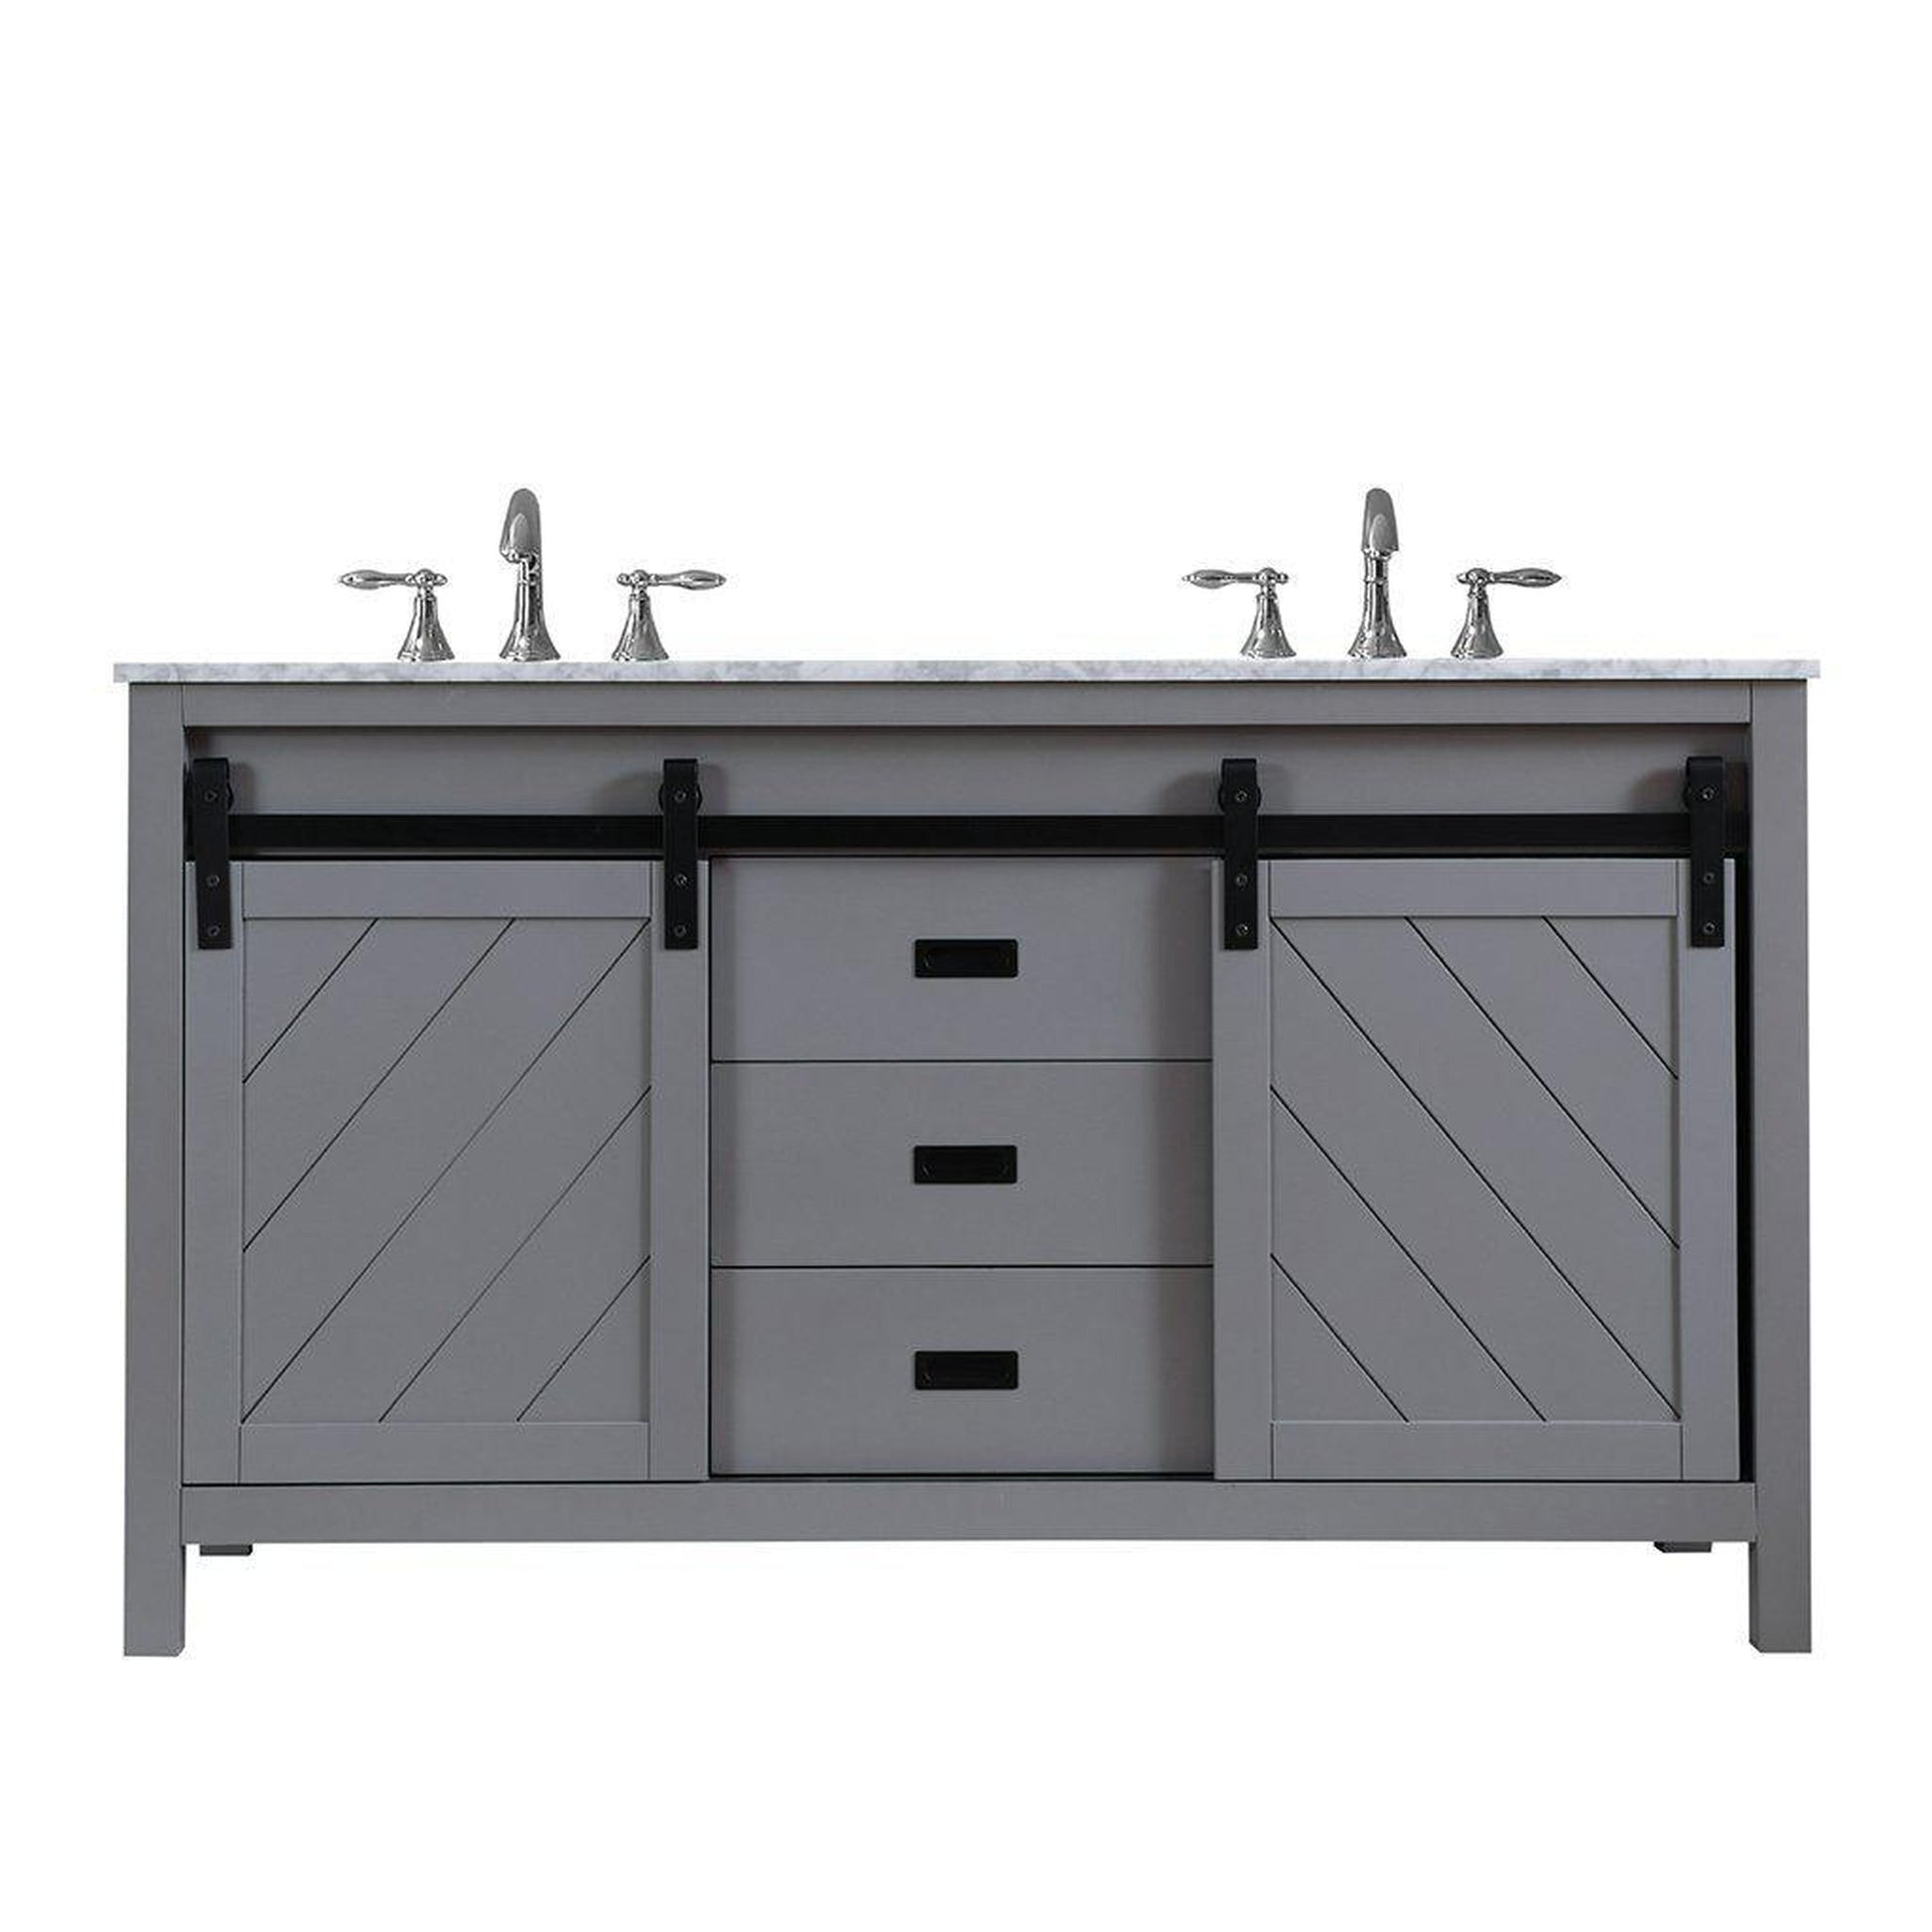 Altair Kinsley 60" Double Gray Freestanding Bathroom Vanity Set With Natural Carrara White Marble Top, Two Rectangular Undermount Ceramic Sinks, and Overflow